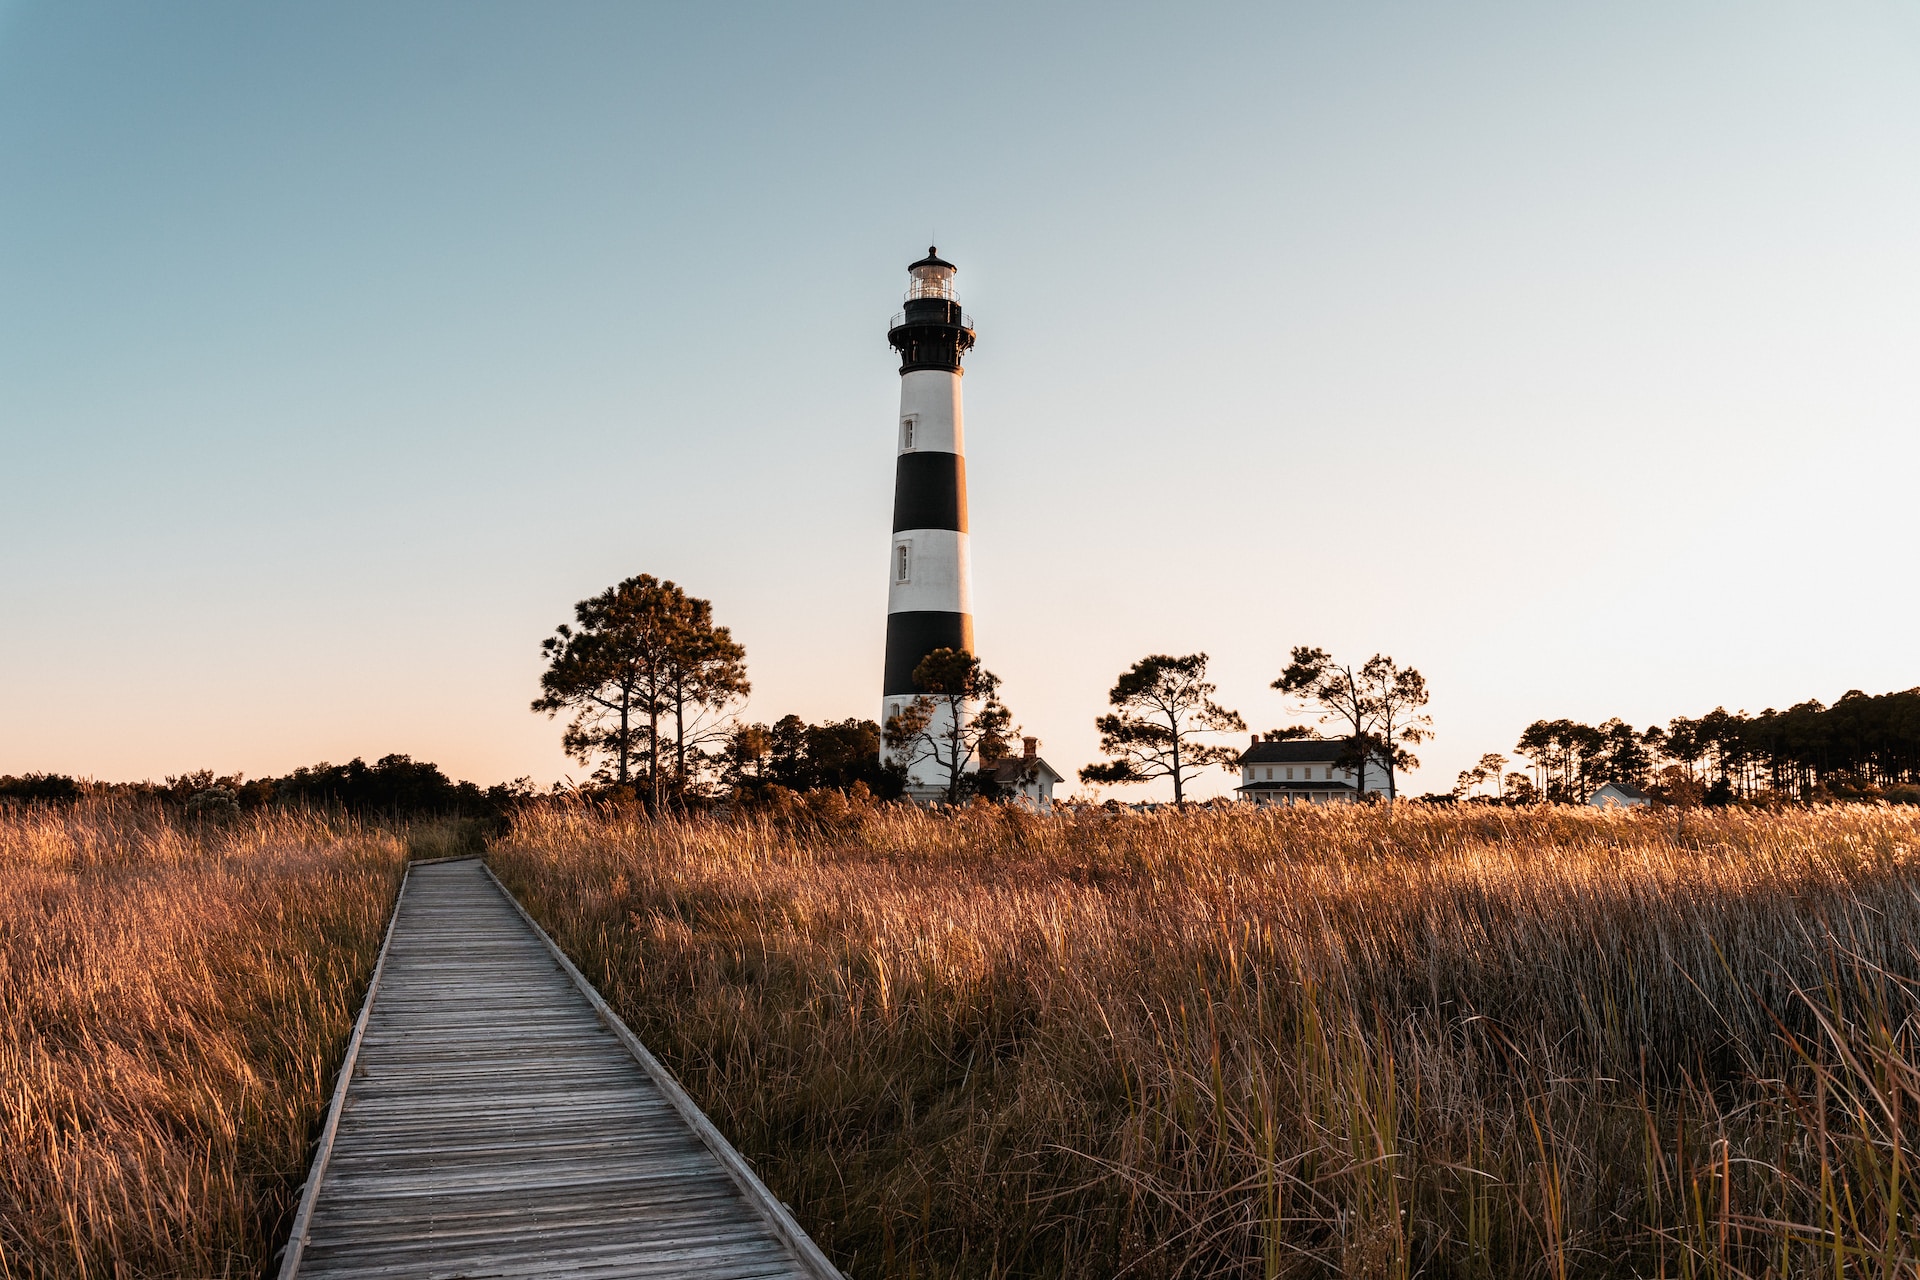 Taken during golden hour at Bodie Island Lighthouse in Nags Head, North Carolina.